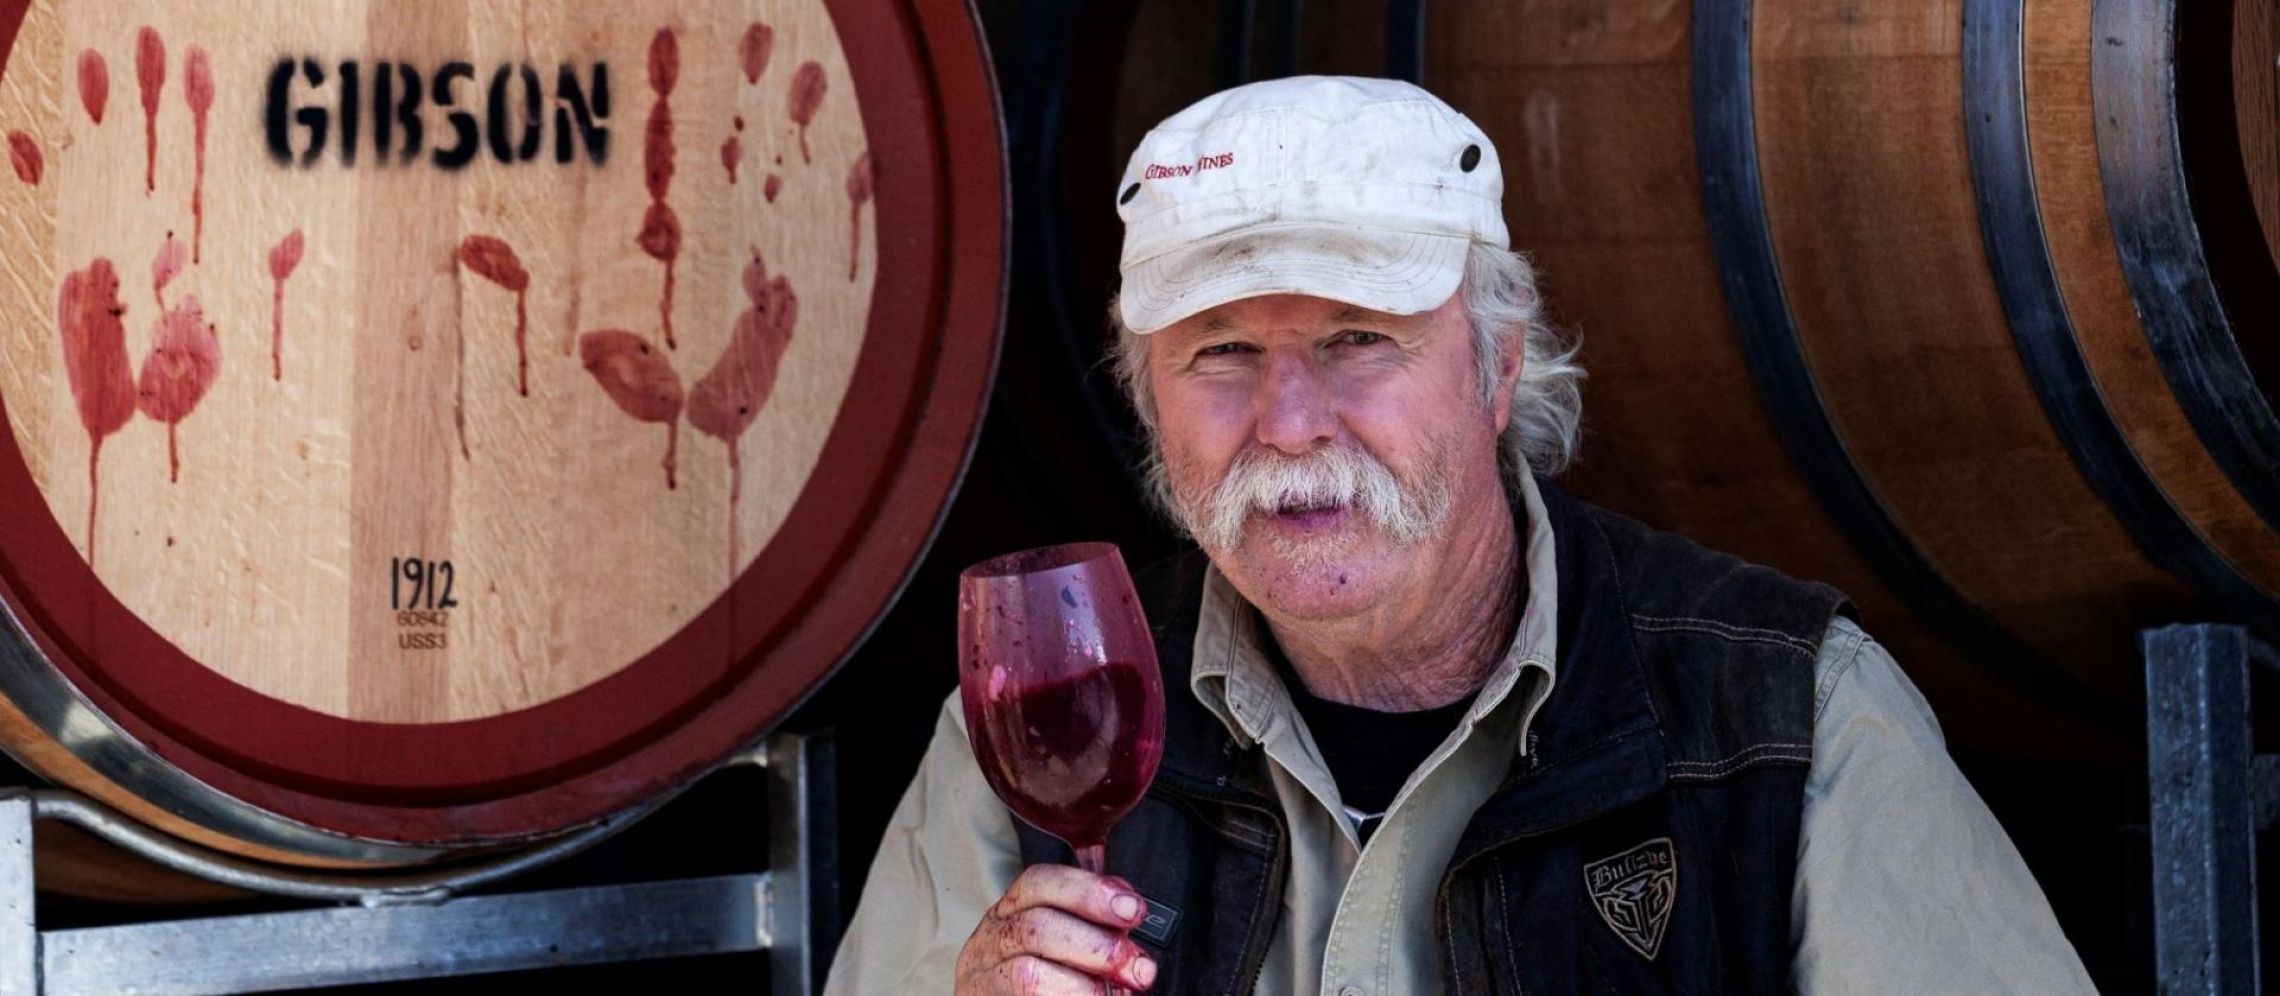 Photo for: Gibson Wines’ Dirtman Scoops Top Prize for His Shiraz